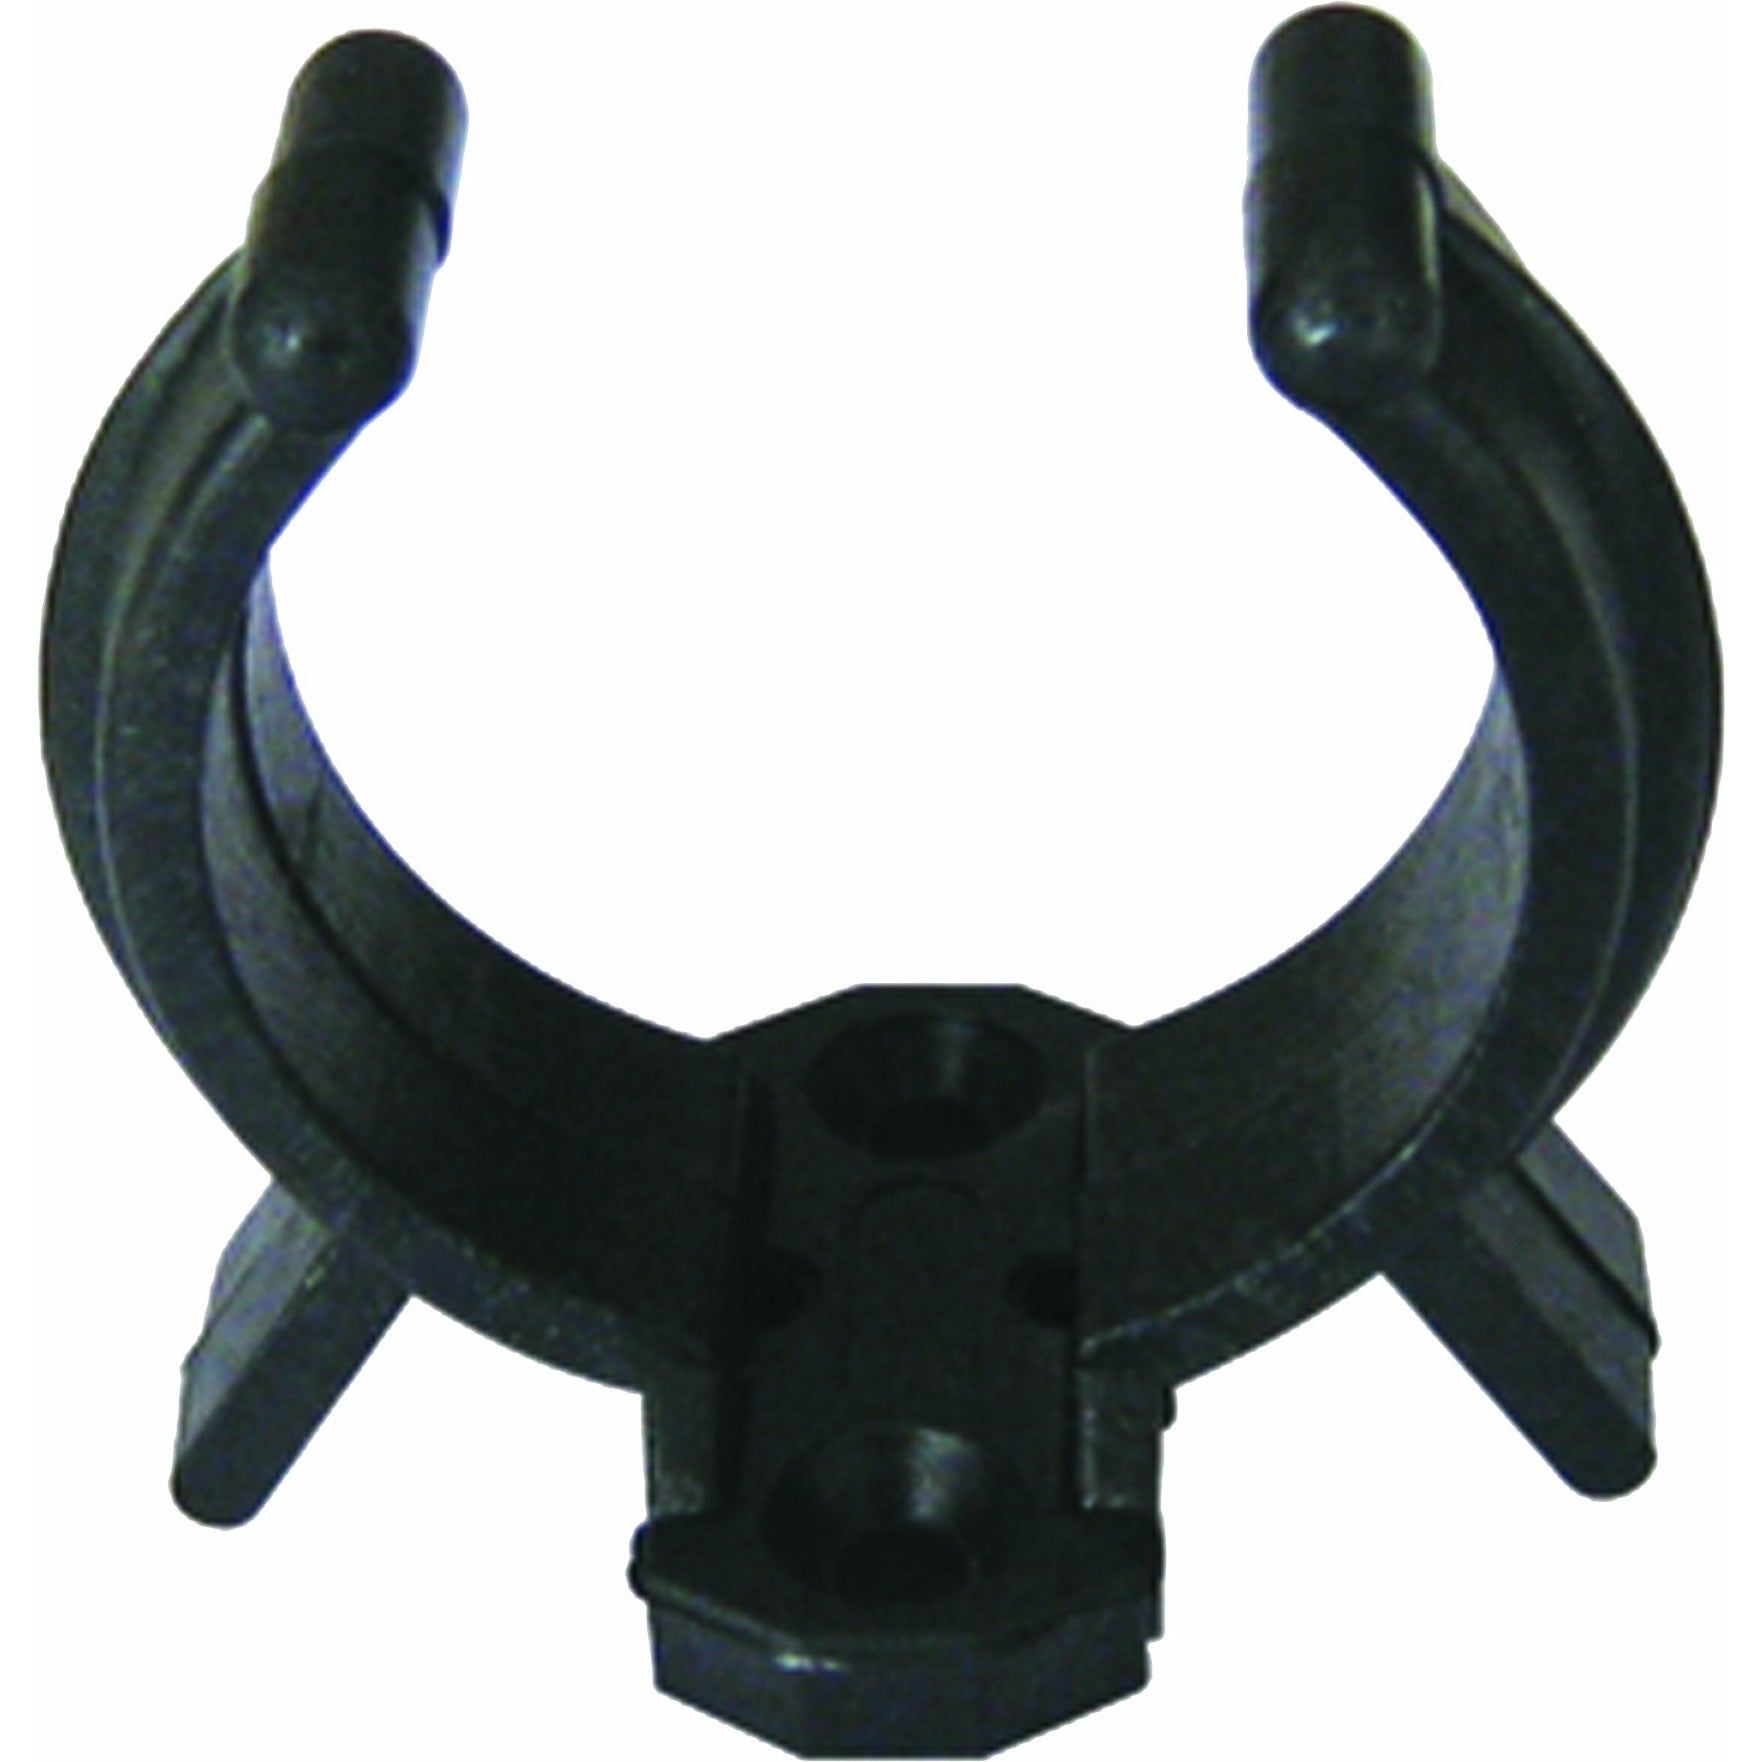 Talamex Clip Holders For Oars Black 22-28MM (2) 25227061